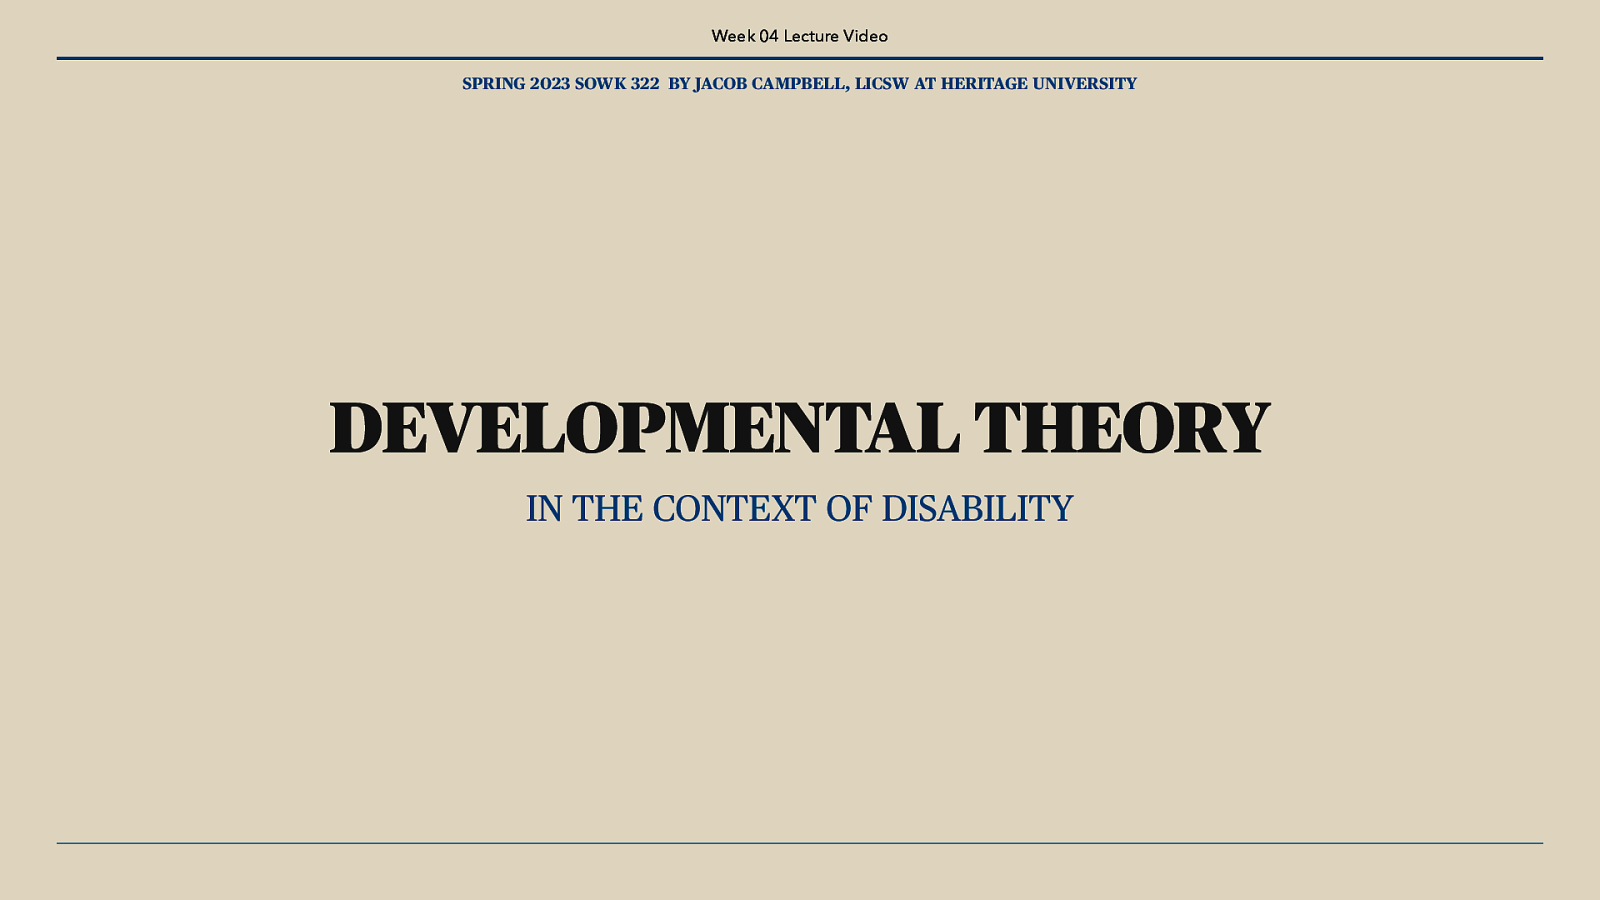 Spring 2023 SOWK 322 Week 04 - Developmental Theory in the Context of Disability